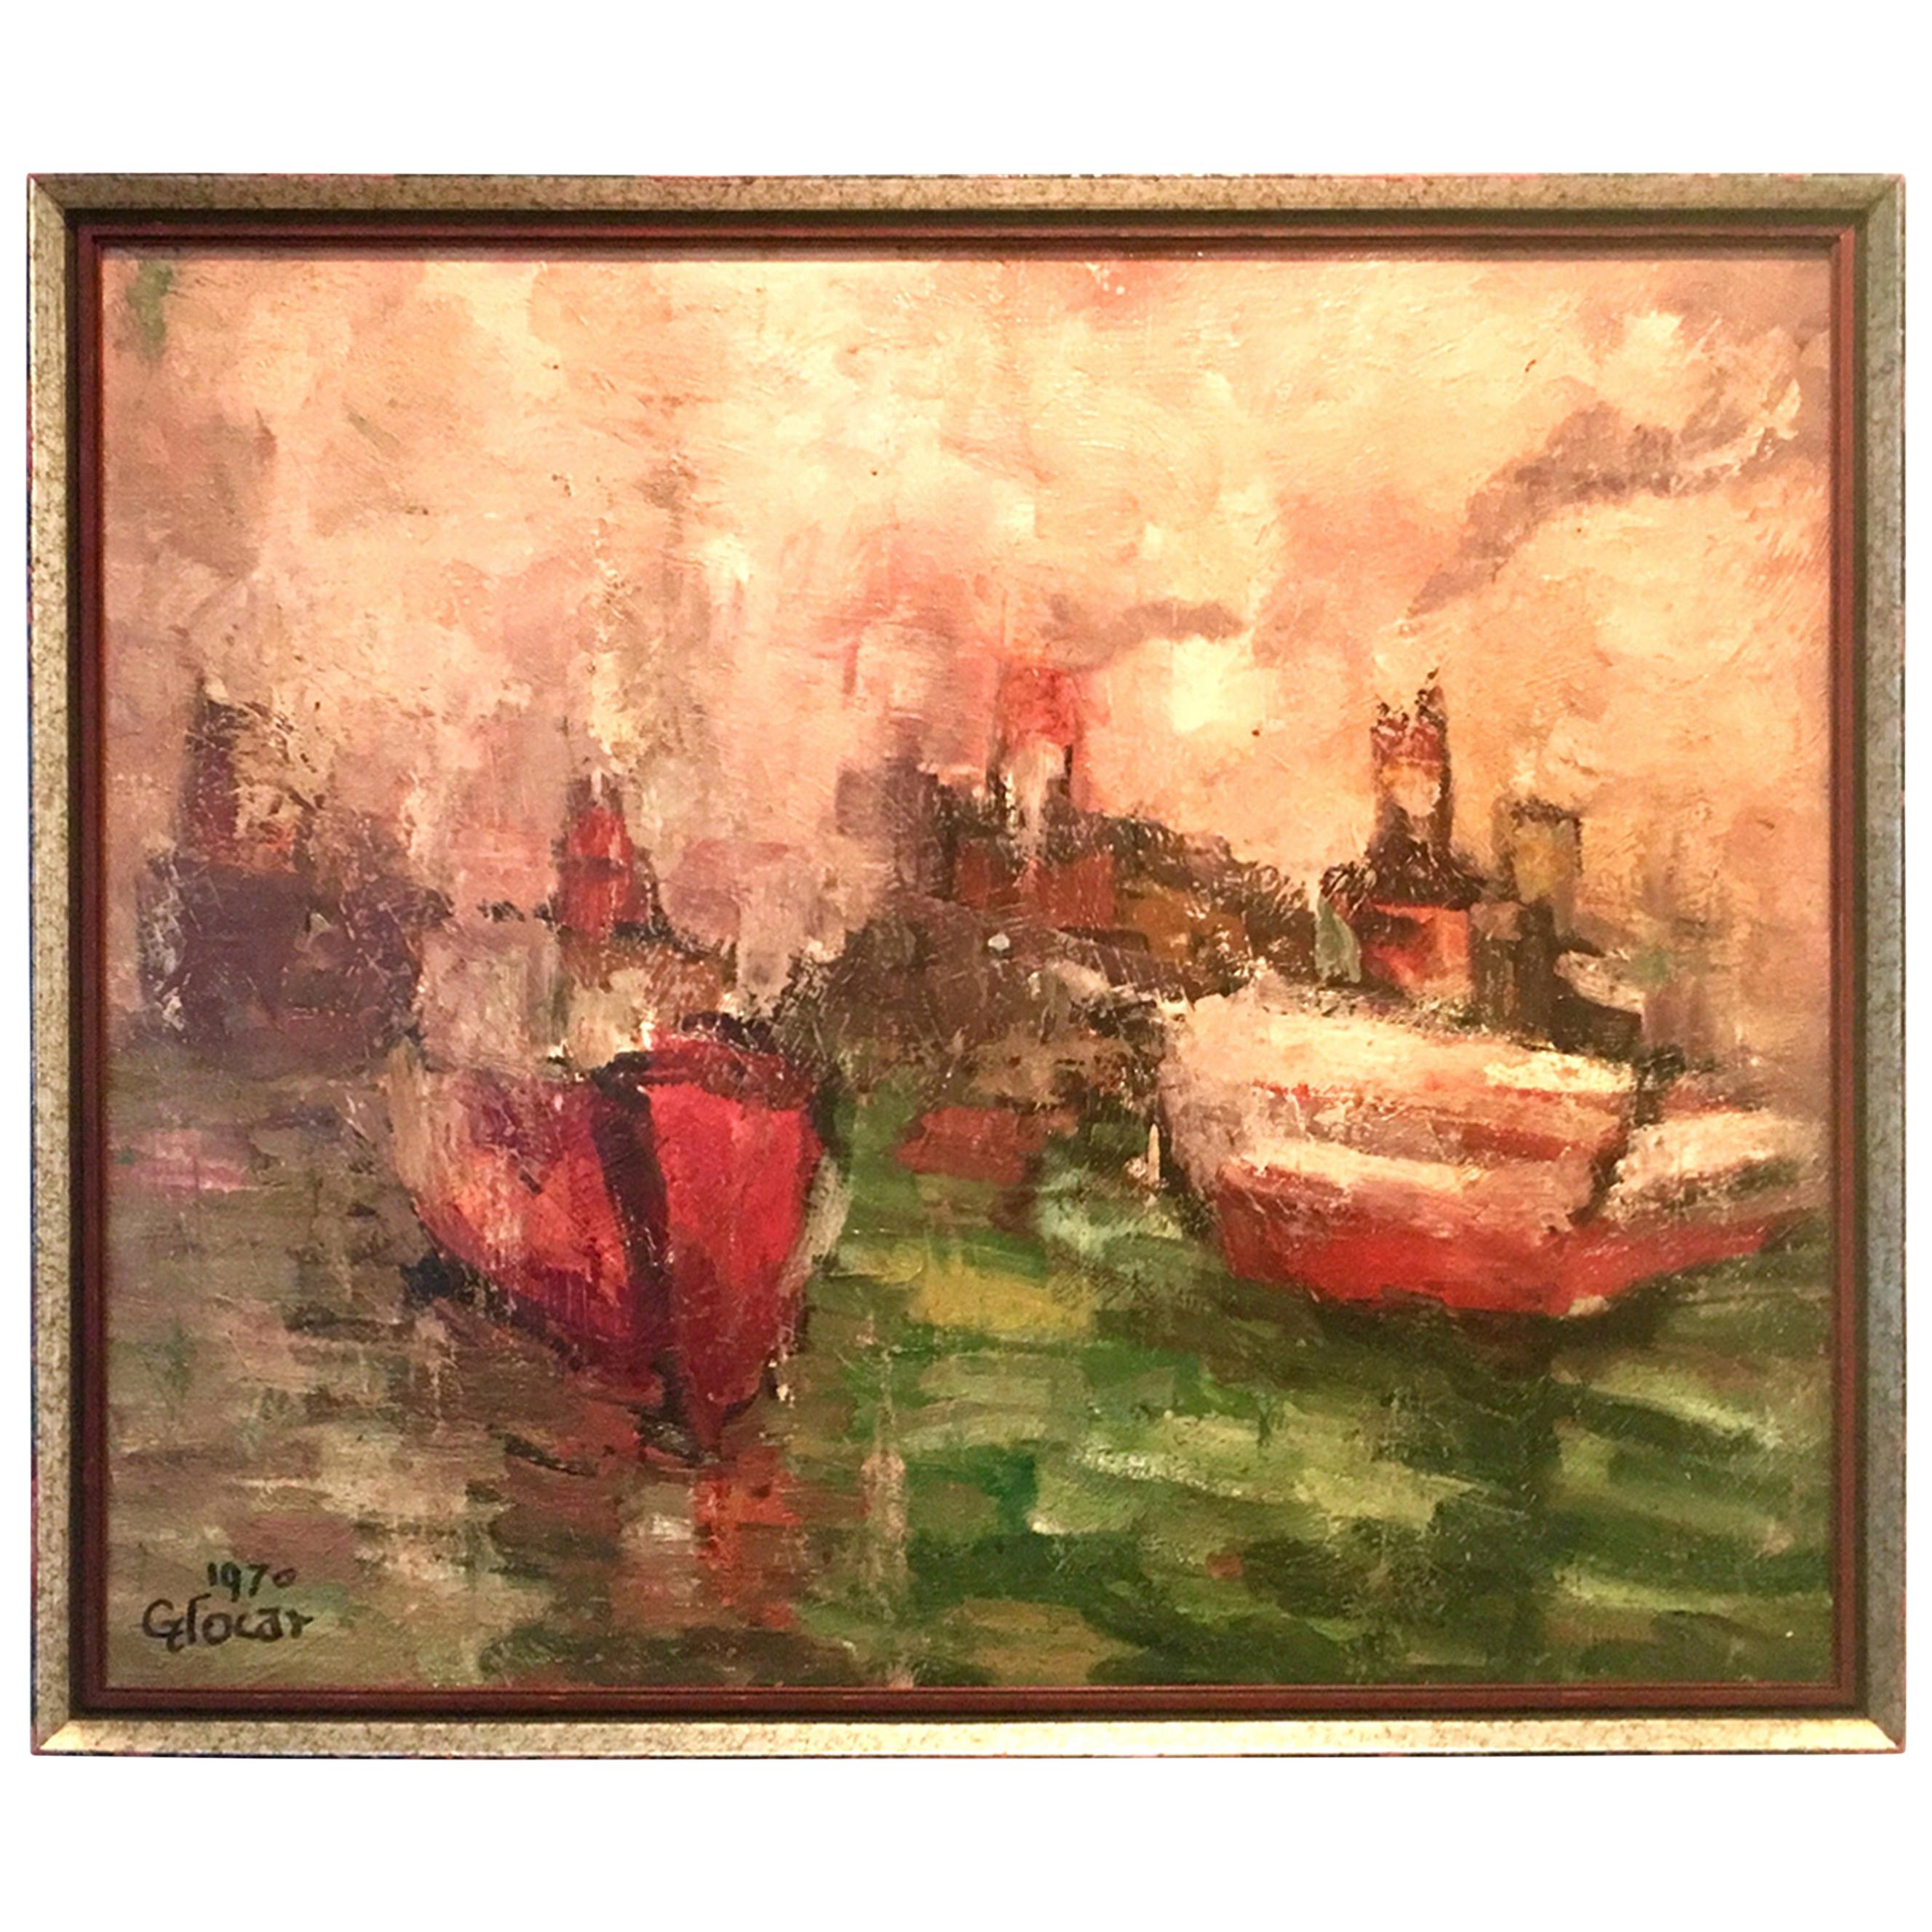 1970 Original Oil on Canvas Abstract Painting by, Emilan Glocar For Sale